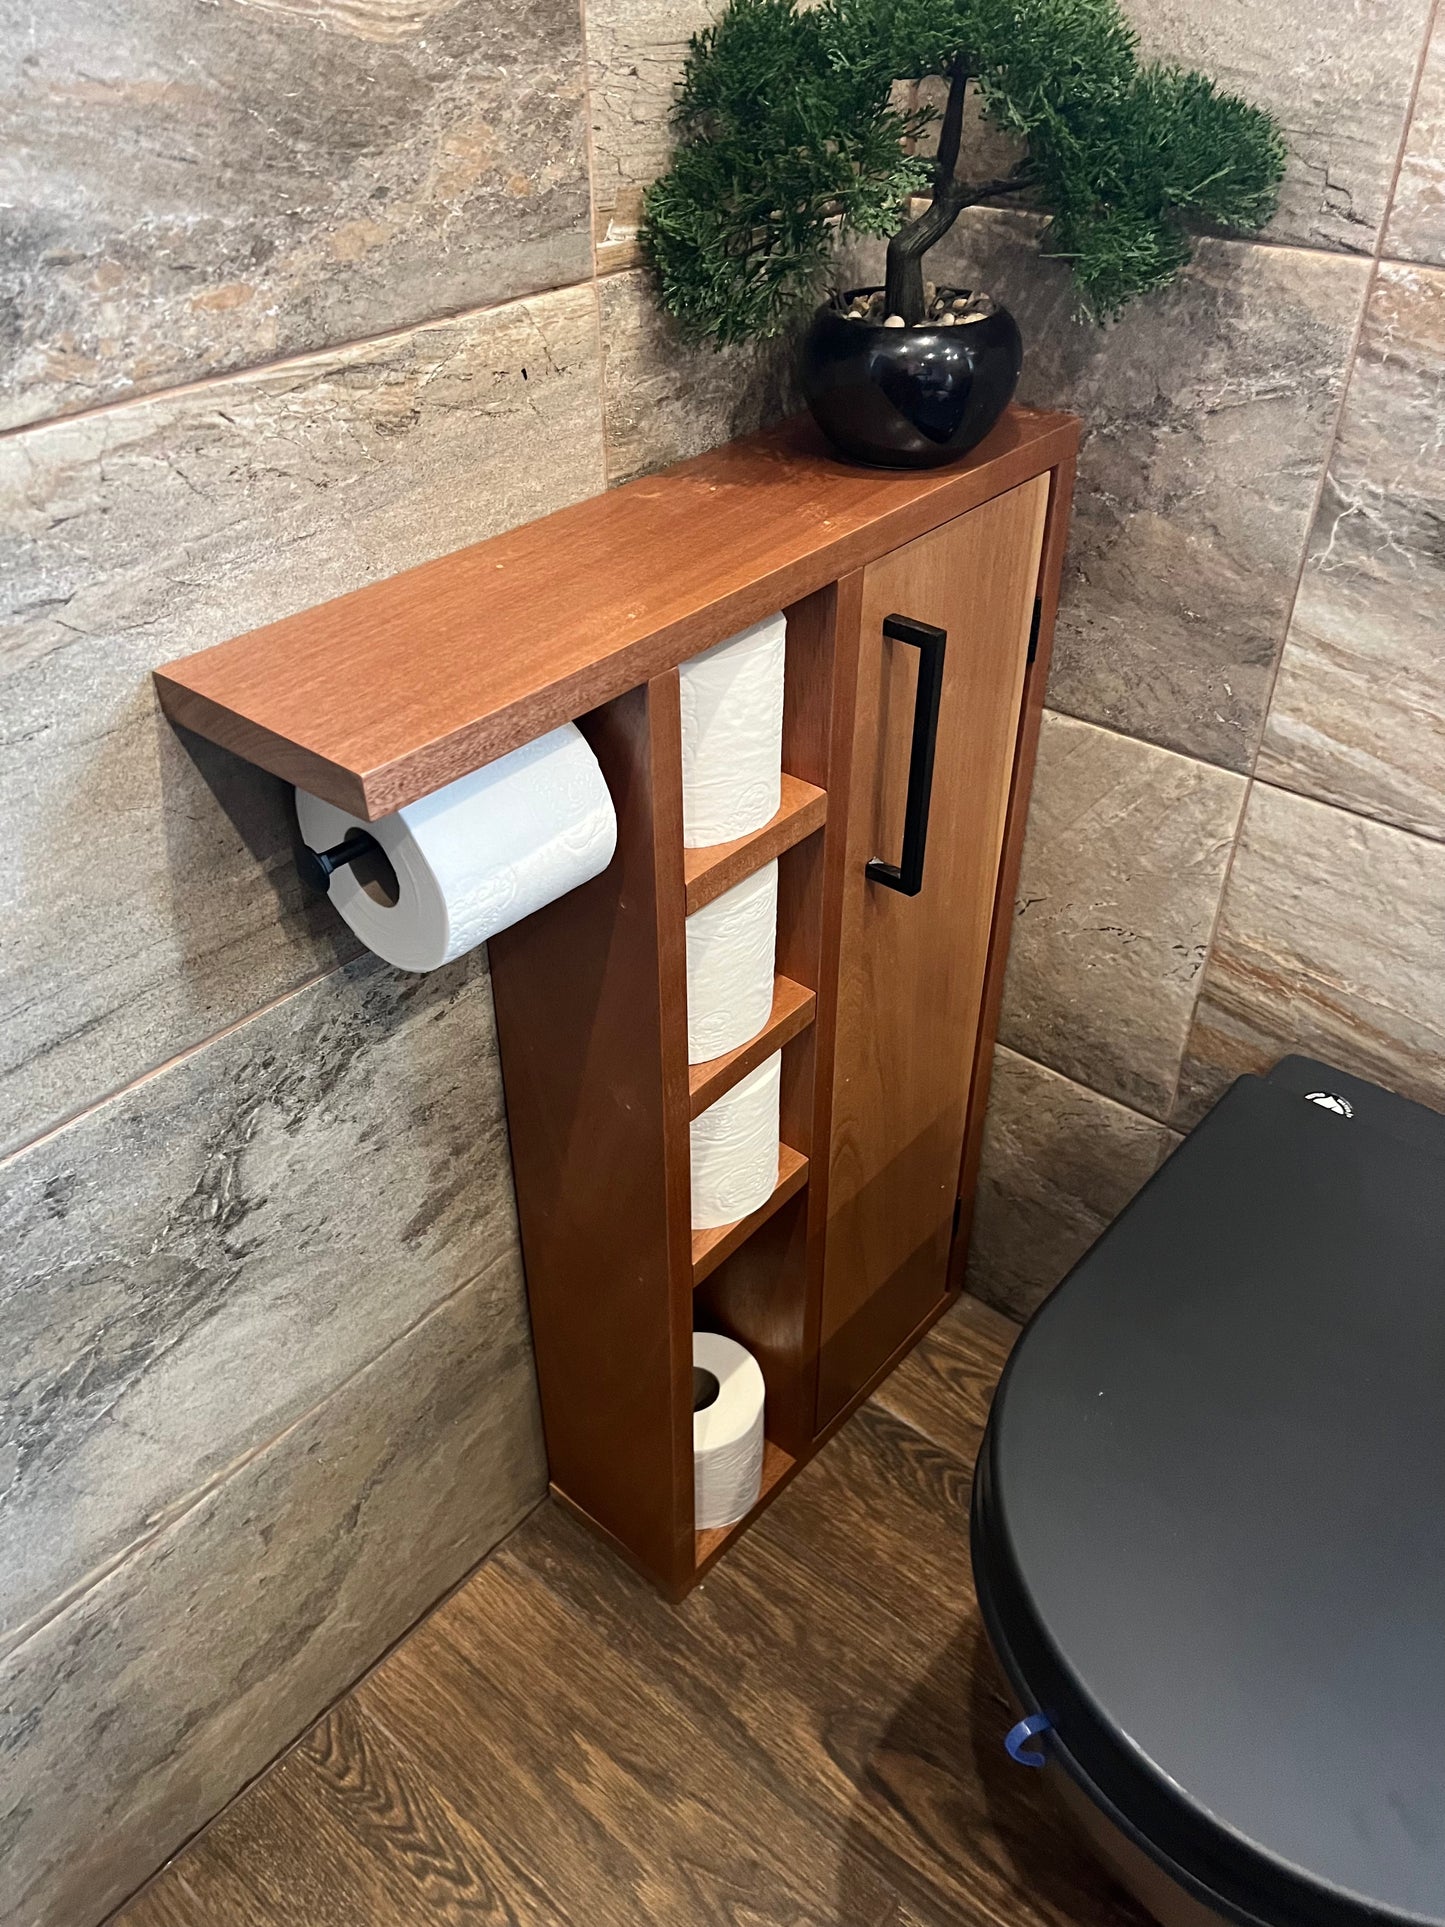 How to Make a Rustic Toilet Paper Holder